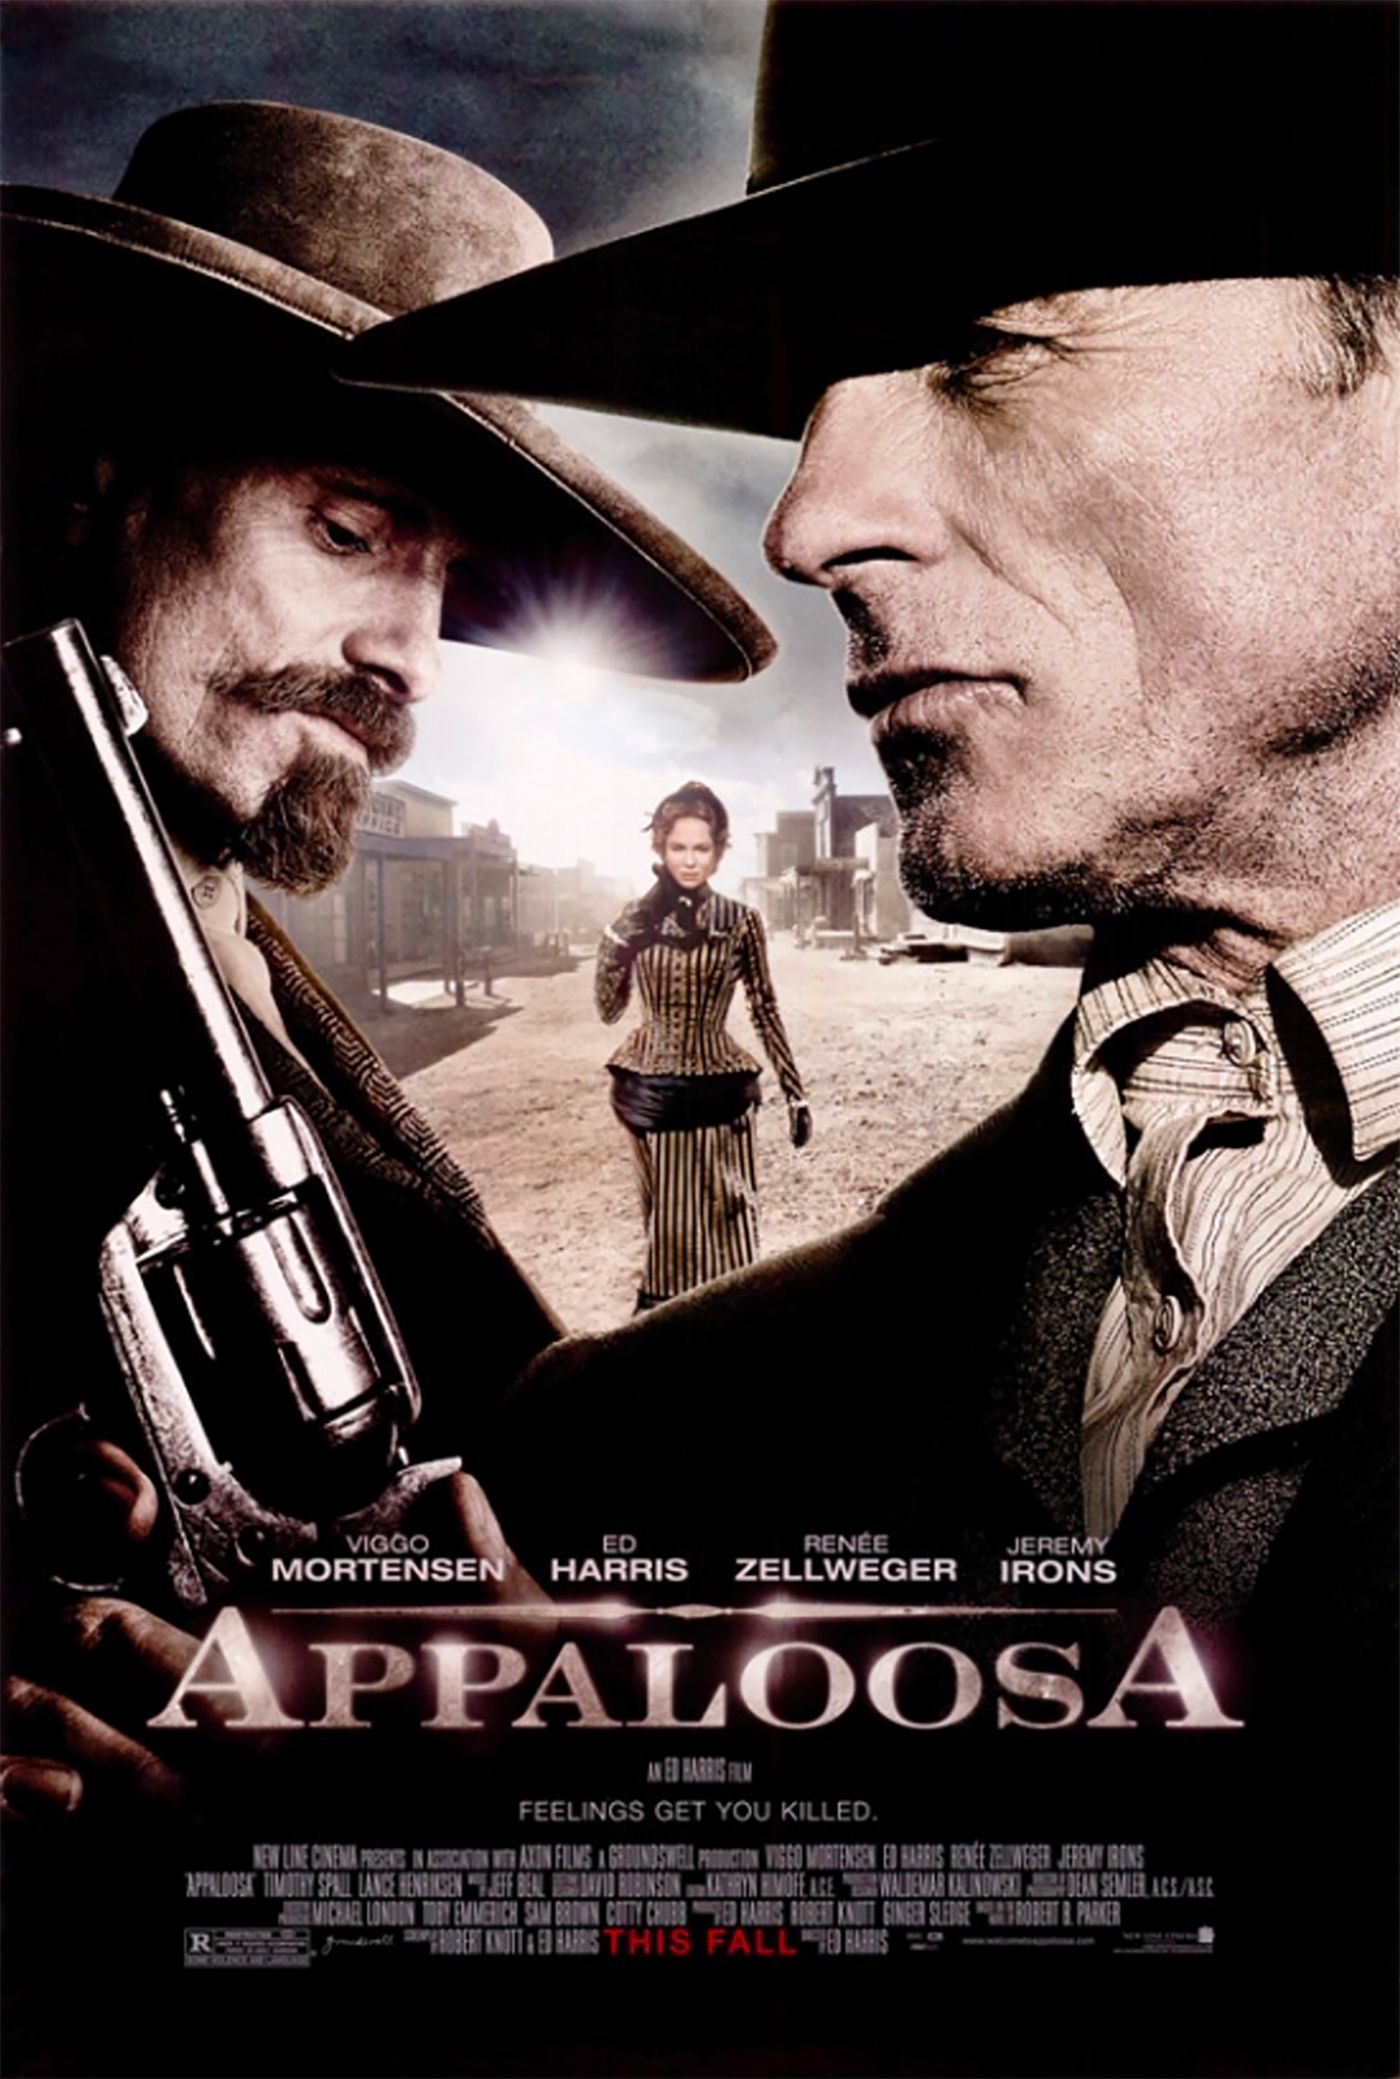 Poster for Appaloosa movie